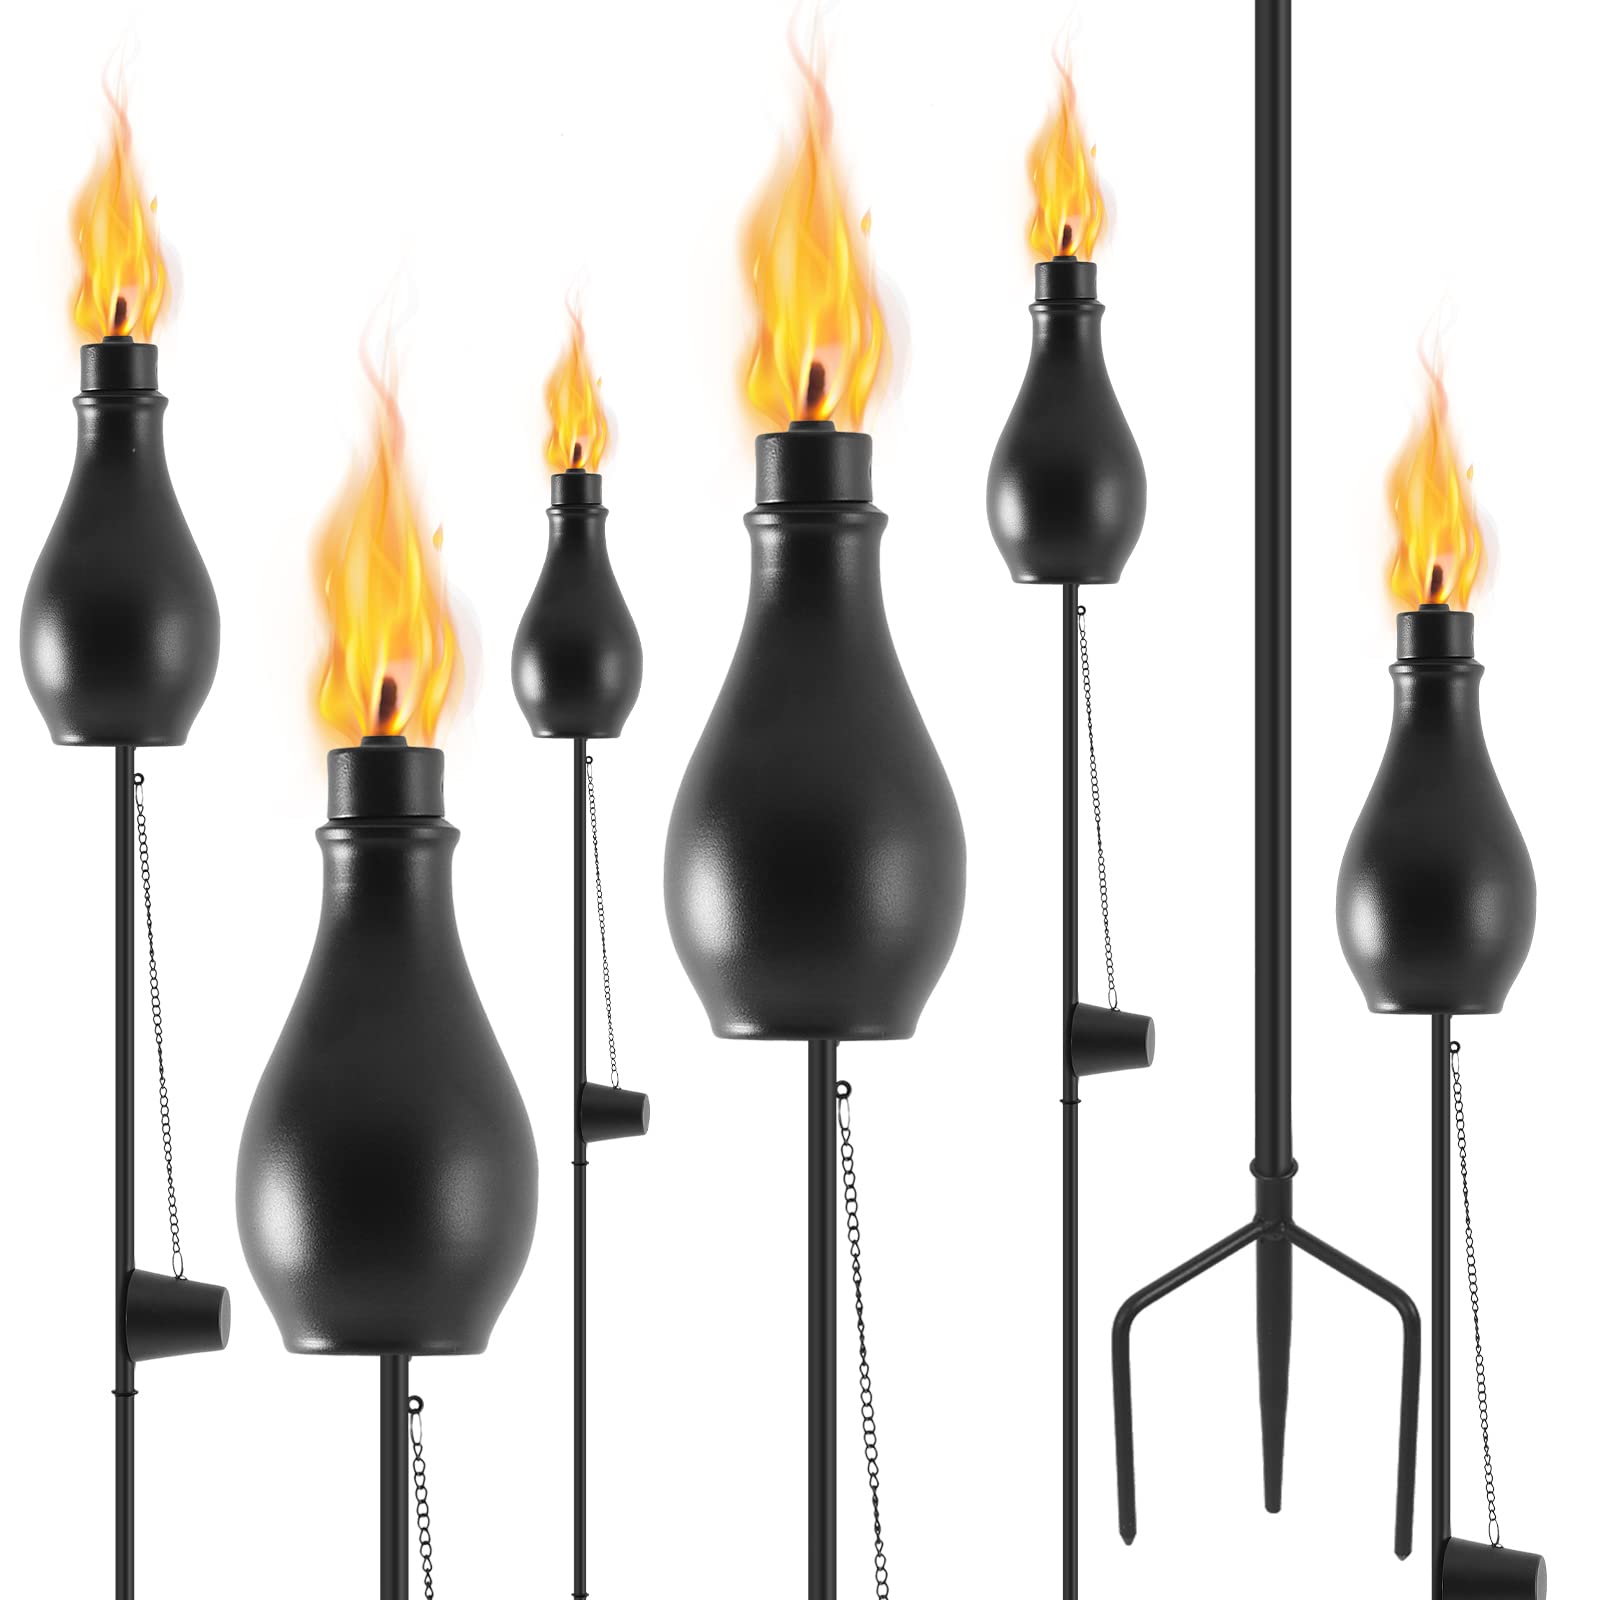 ZSPENG 6 Pack Metal Torches for Outside, Upgraded Metal Torches with 3-Prong Grounded Stake, Extra-Large 59-Inch Citronella Torches for Party Patio Pathway